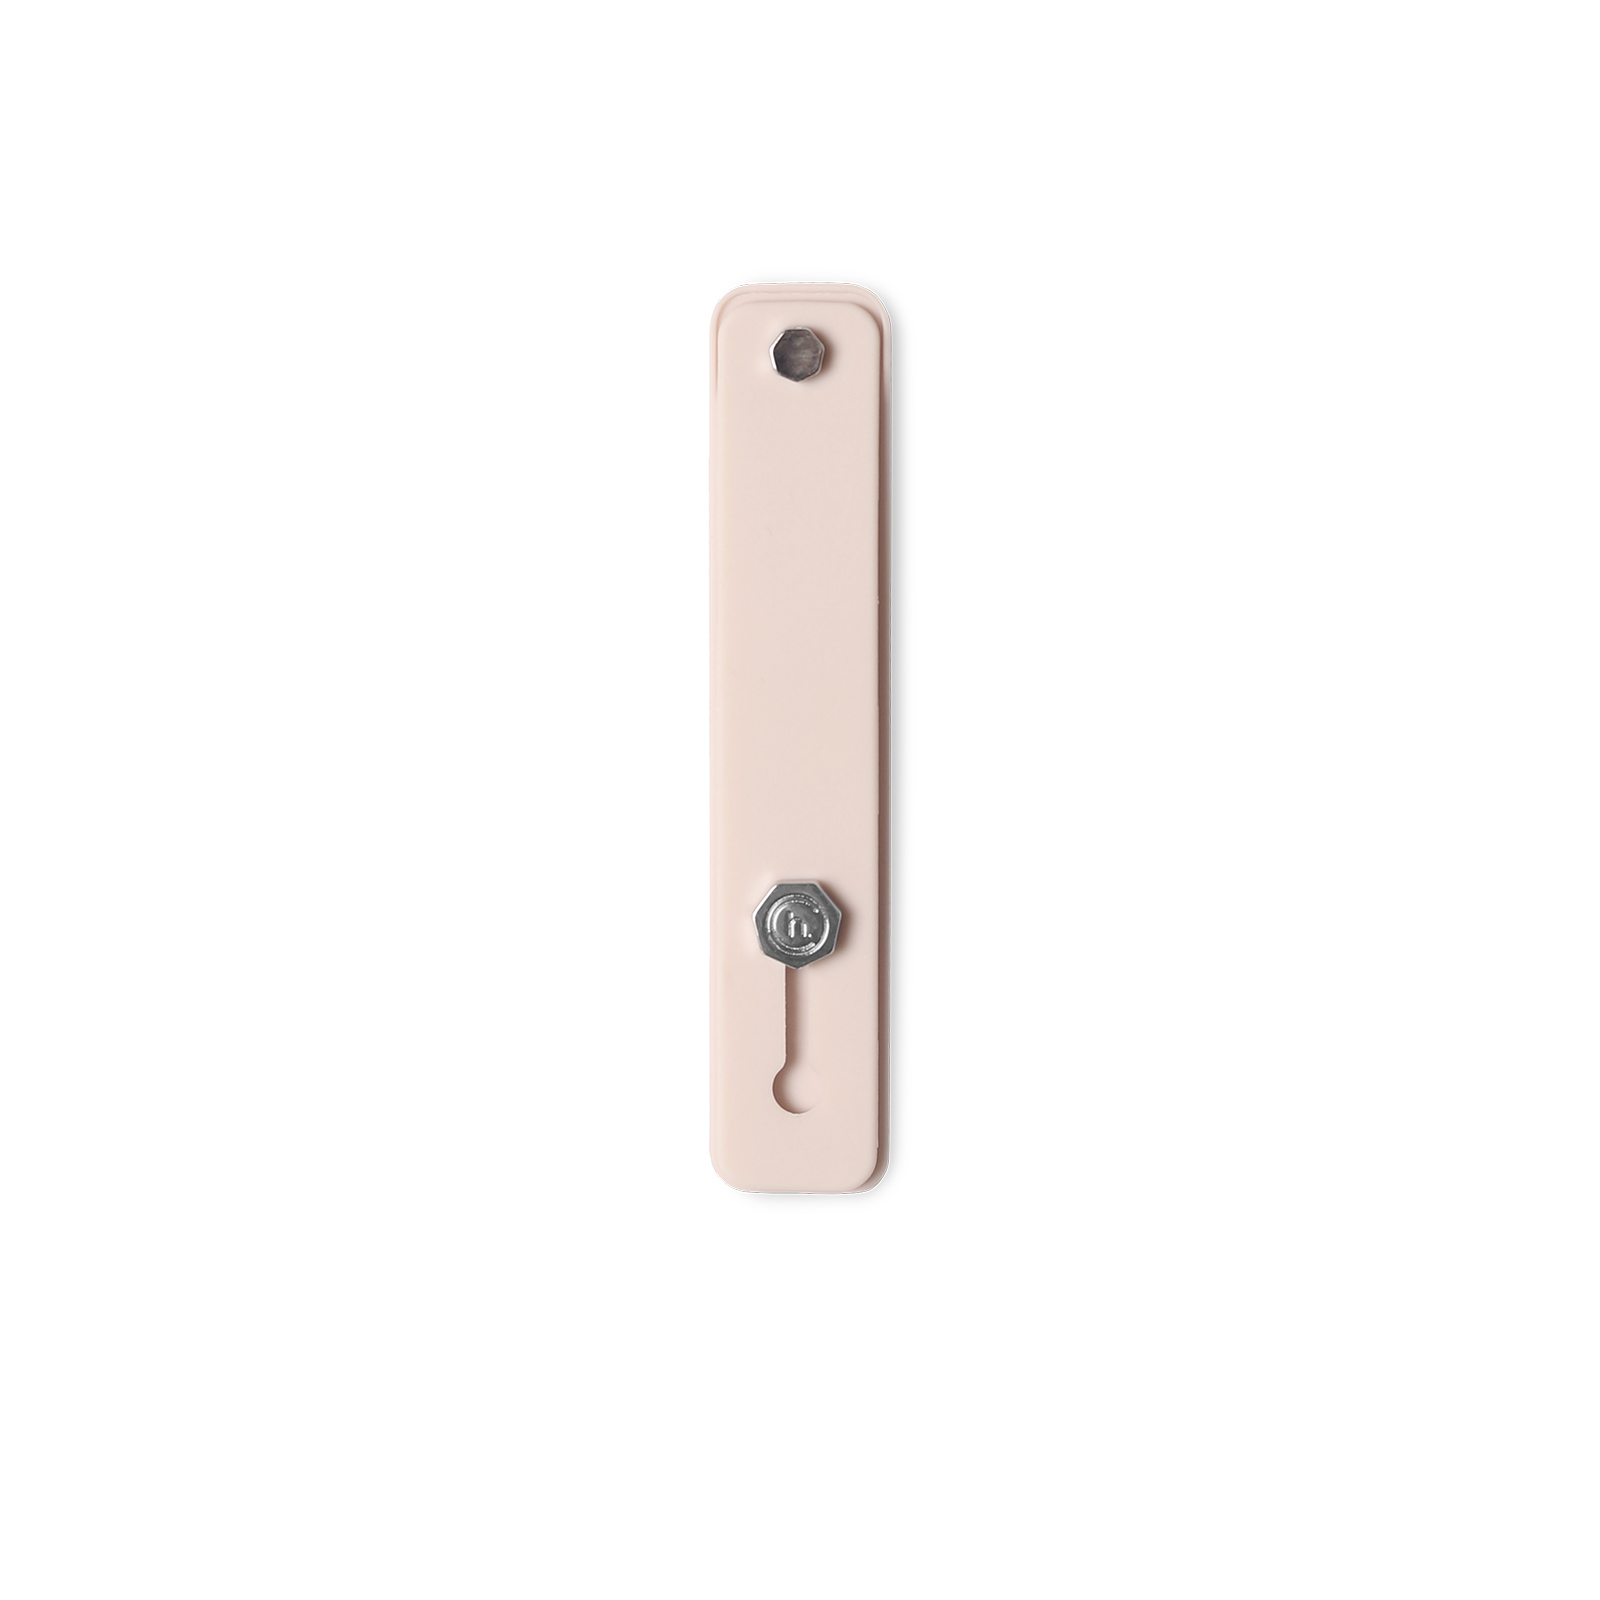 Finger strap, attachable phone grip, blush pink